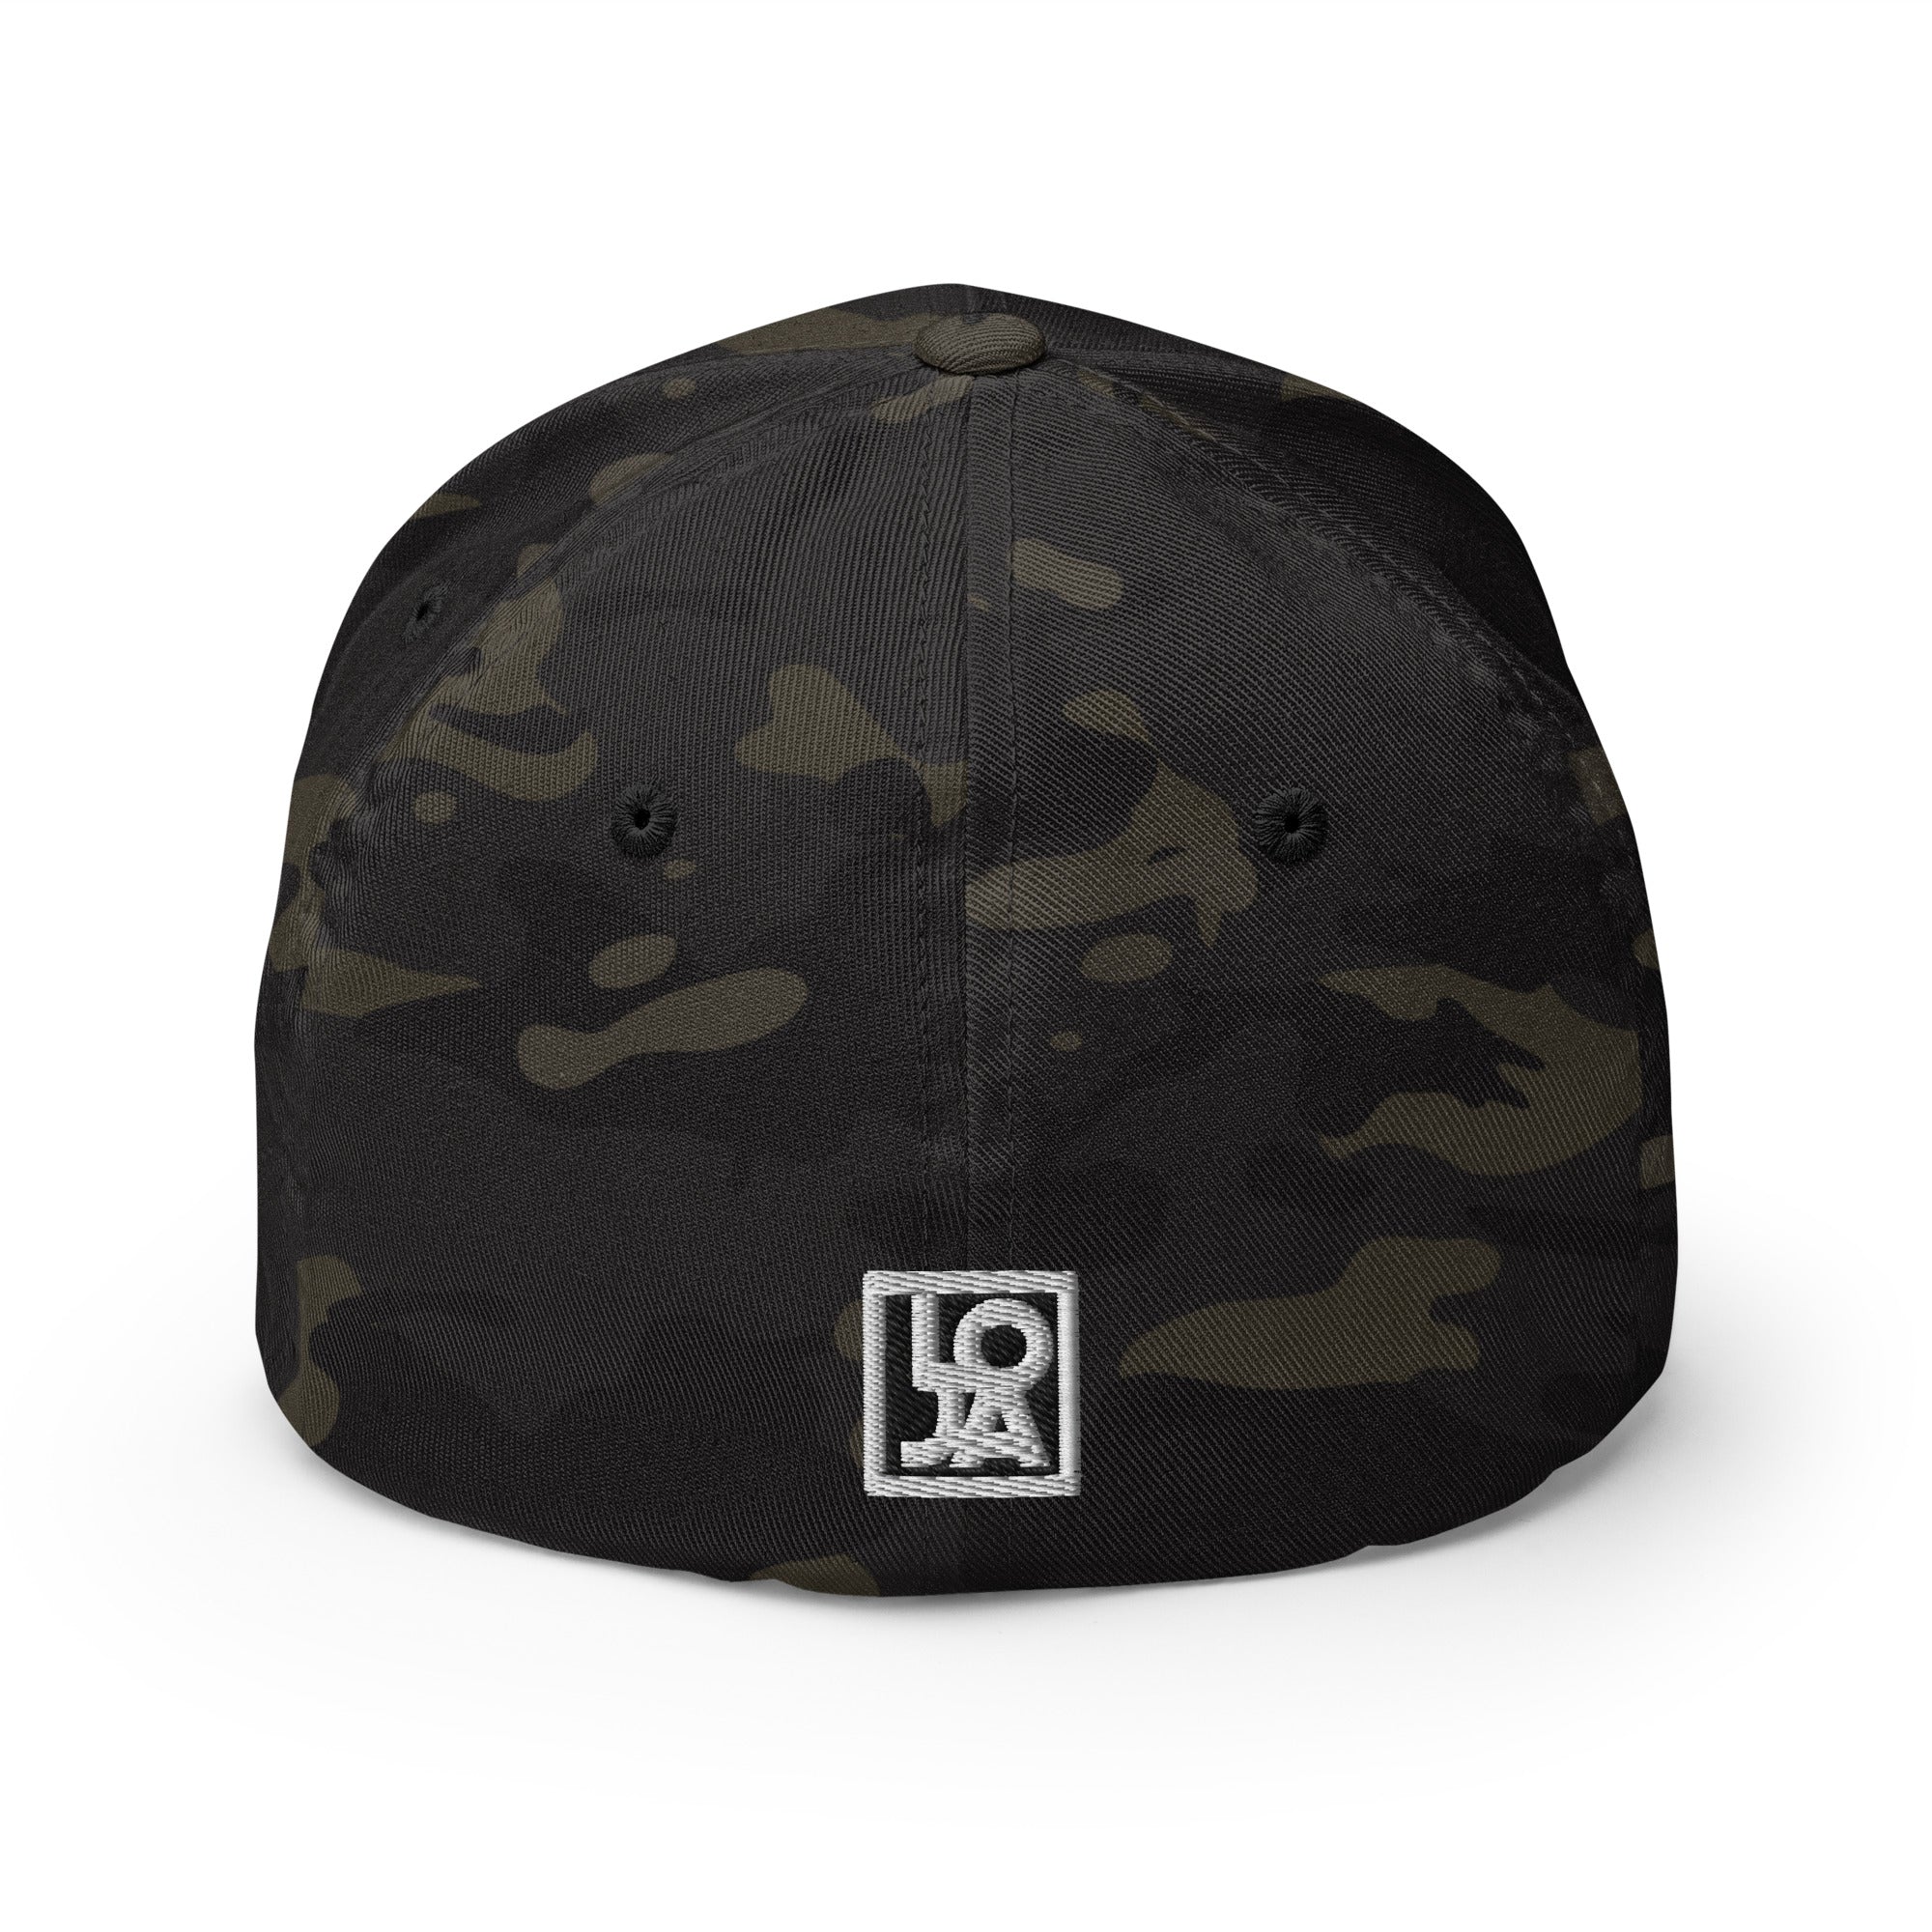 The Black Star Of The Tribe Of Judah Structured Twill Cap